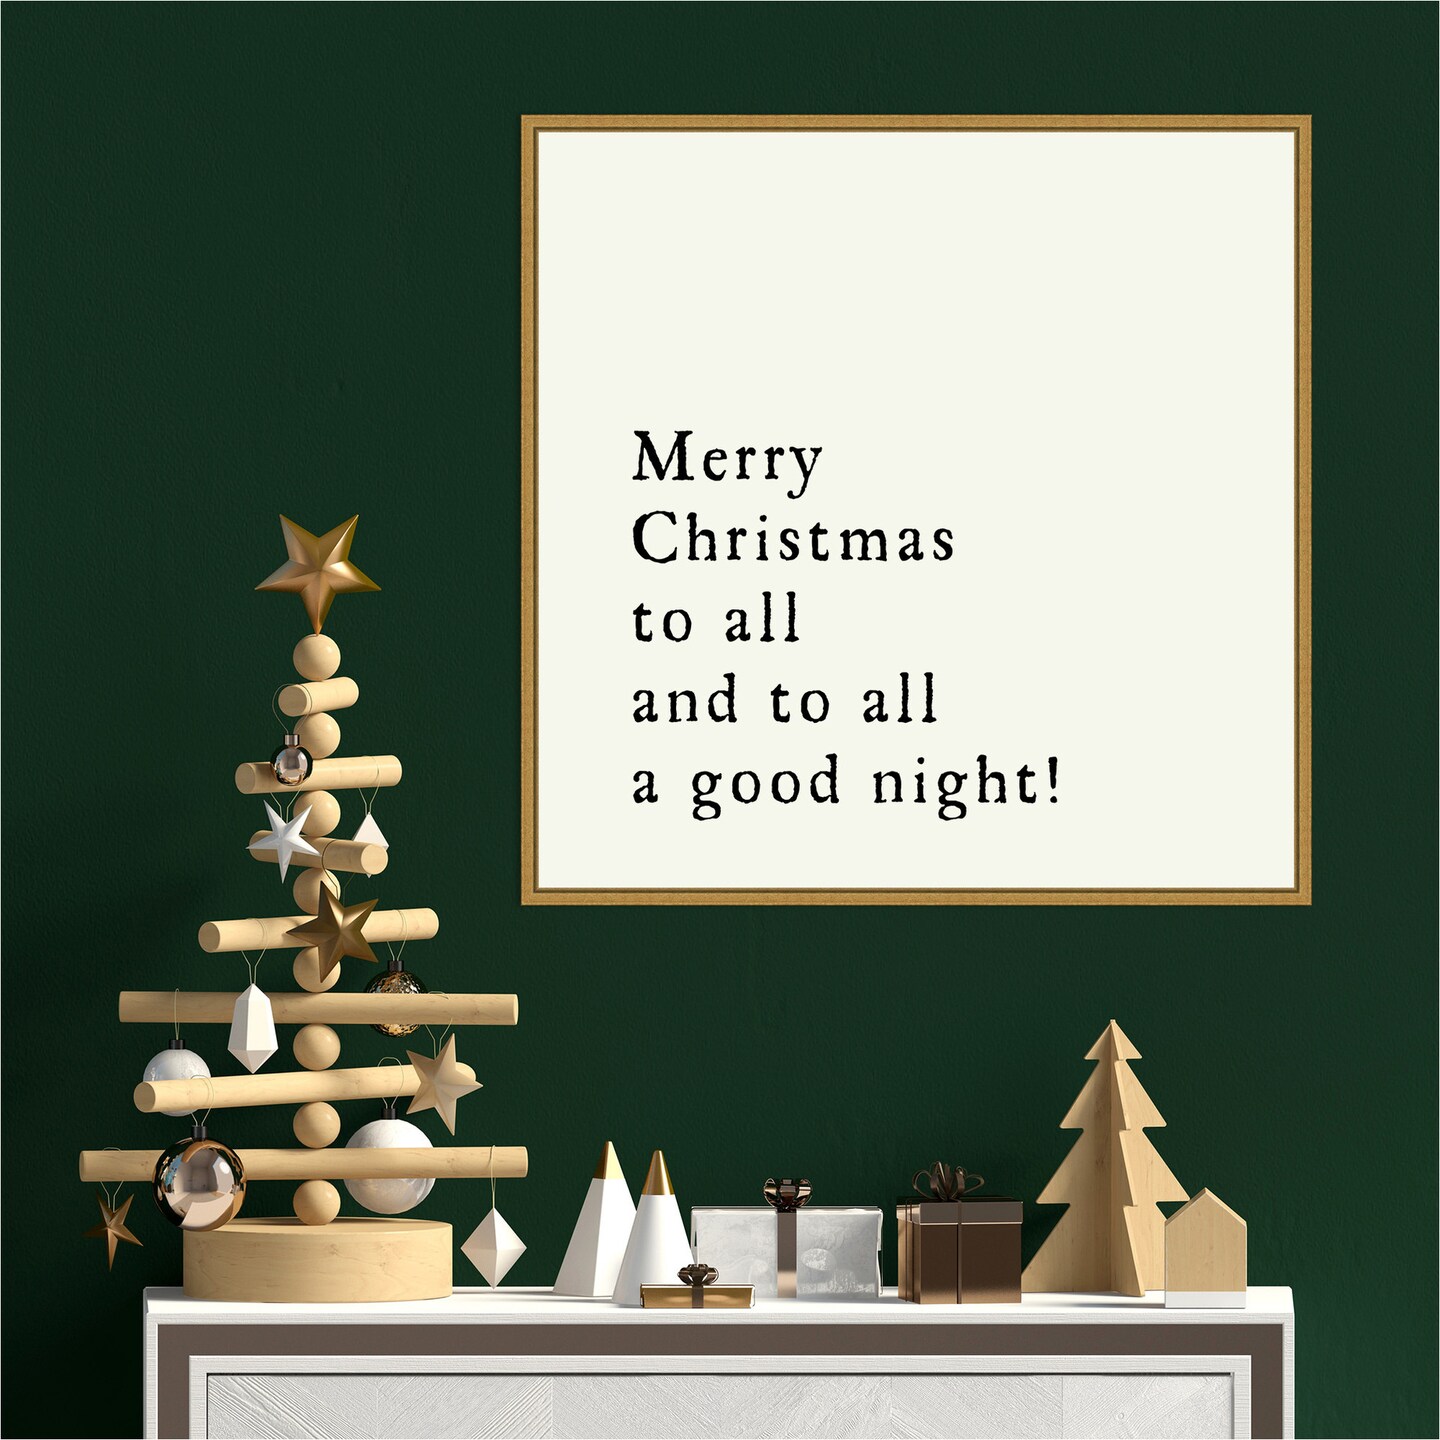 Merry Christmas To All by Amanti Art Portfolio 22-in. W x 22-in. H. Canvas Wall Art Print Framed in Gold